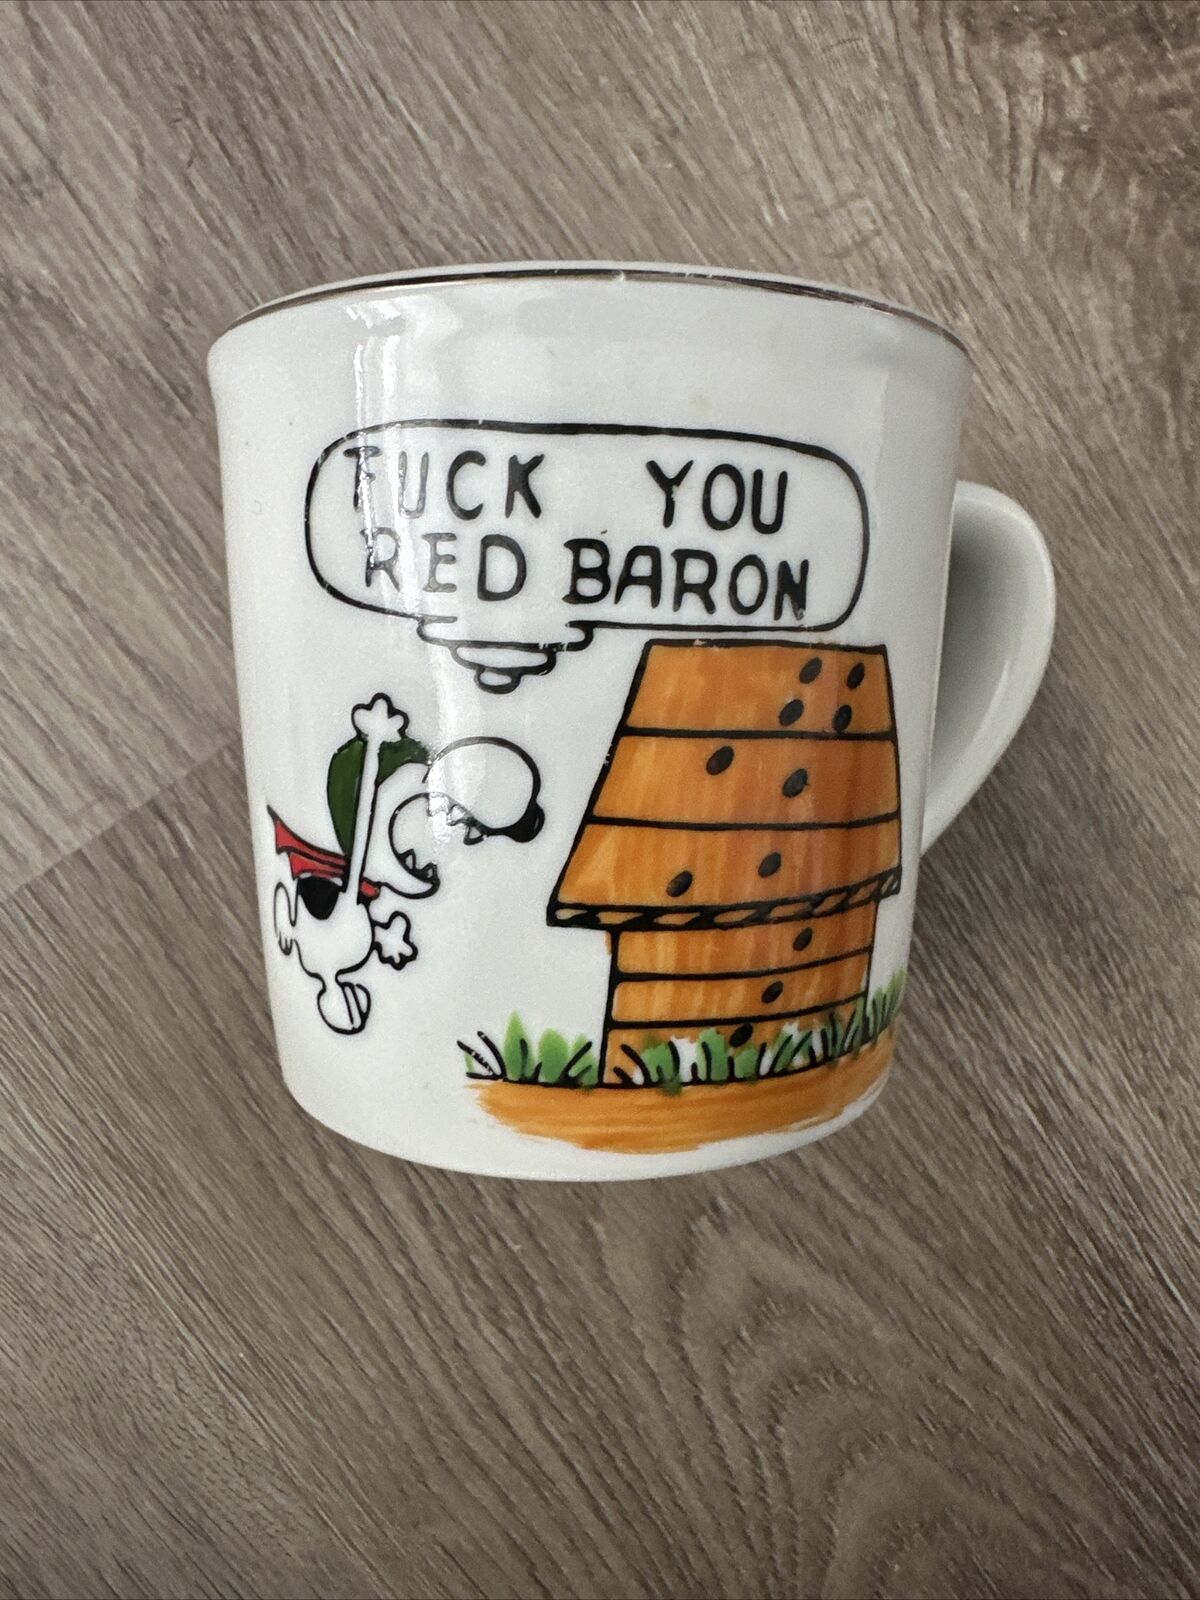 Vintage Snoopy Mug F*** You Red Baron ***contains explicit Content***